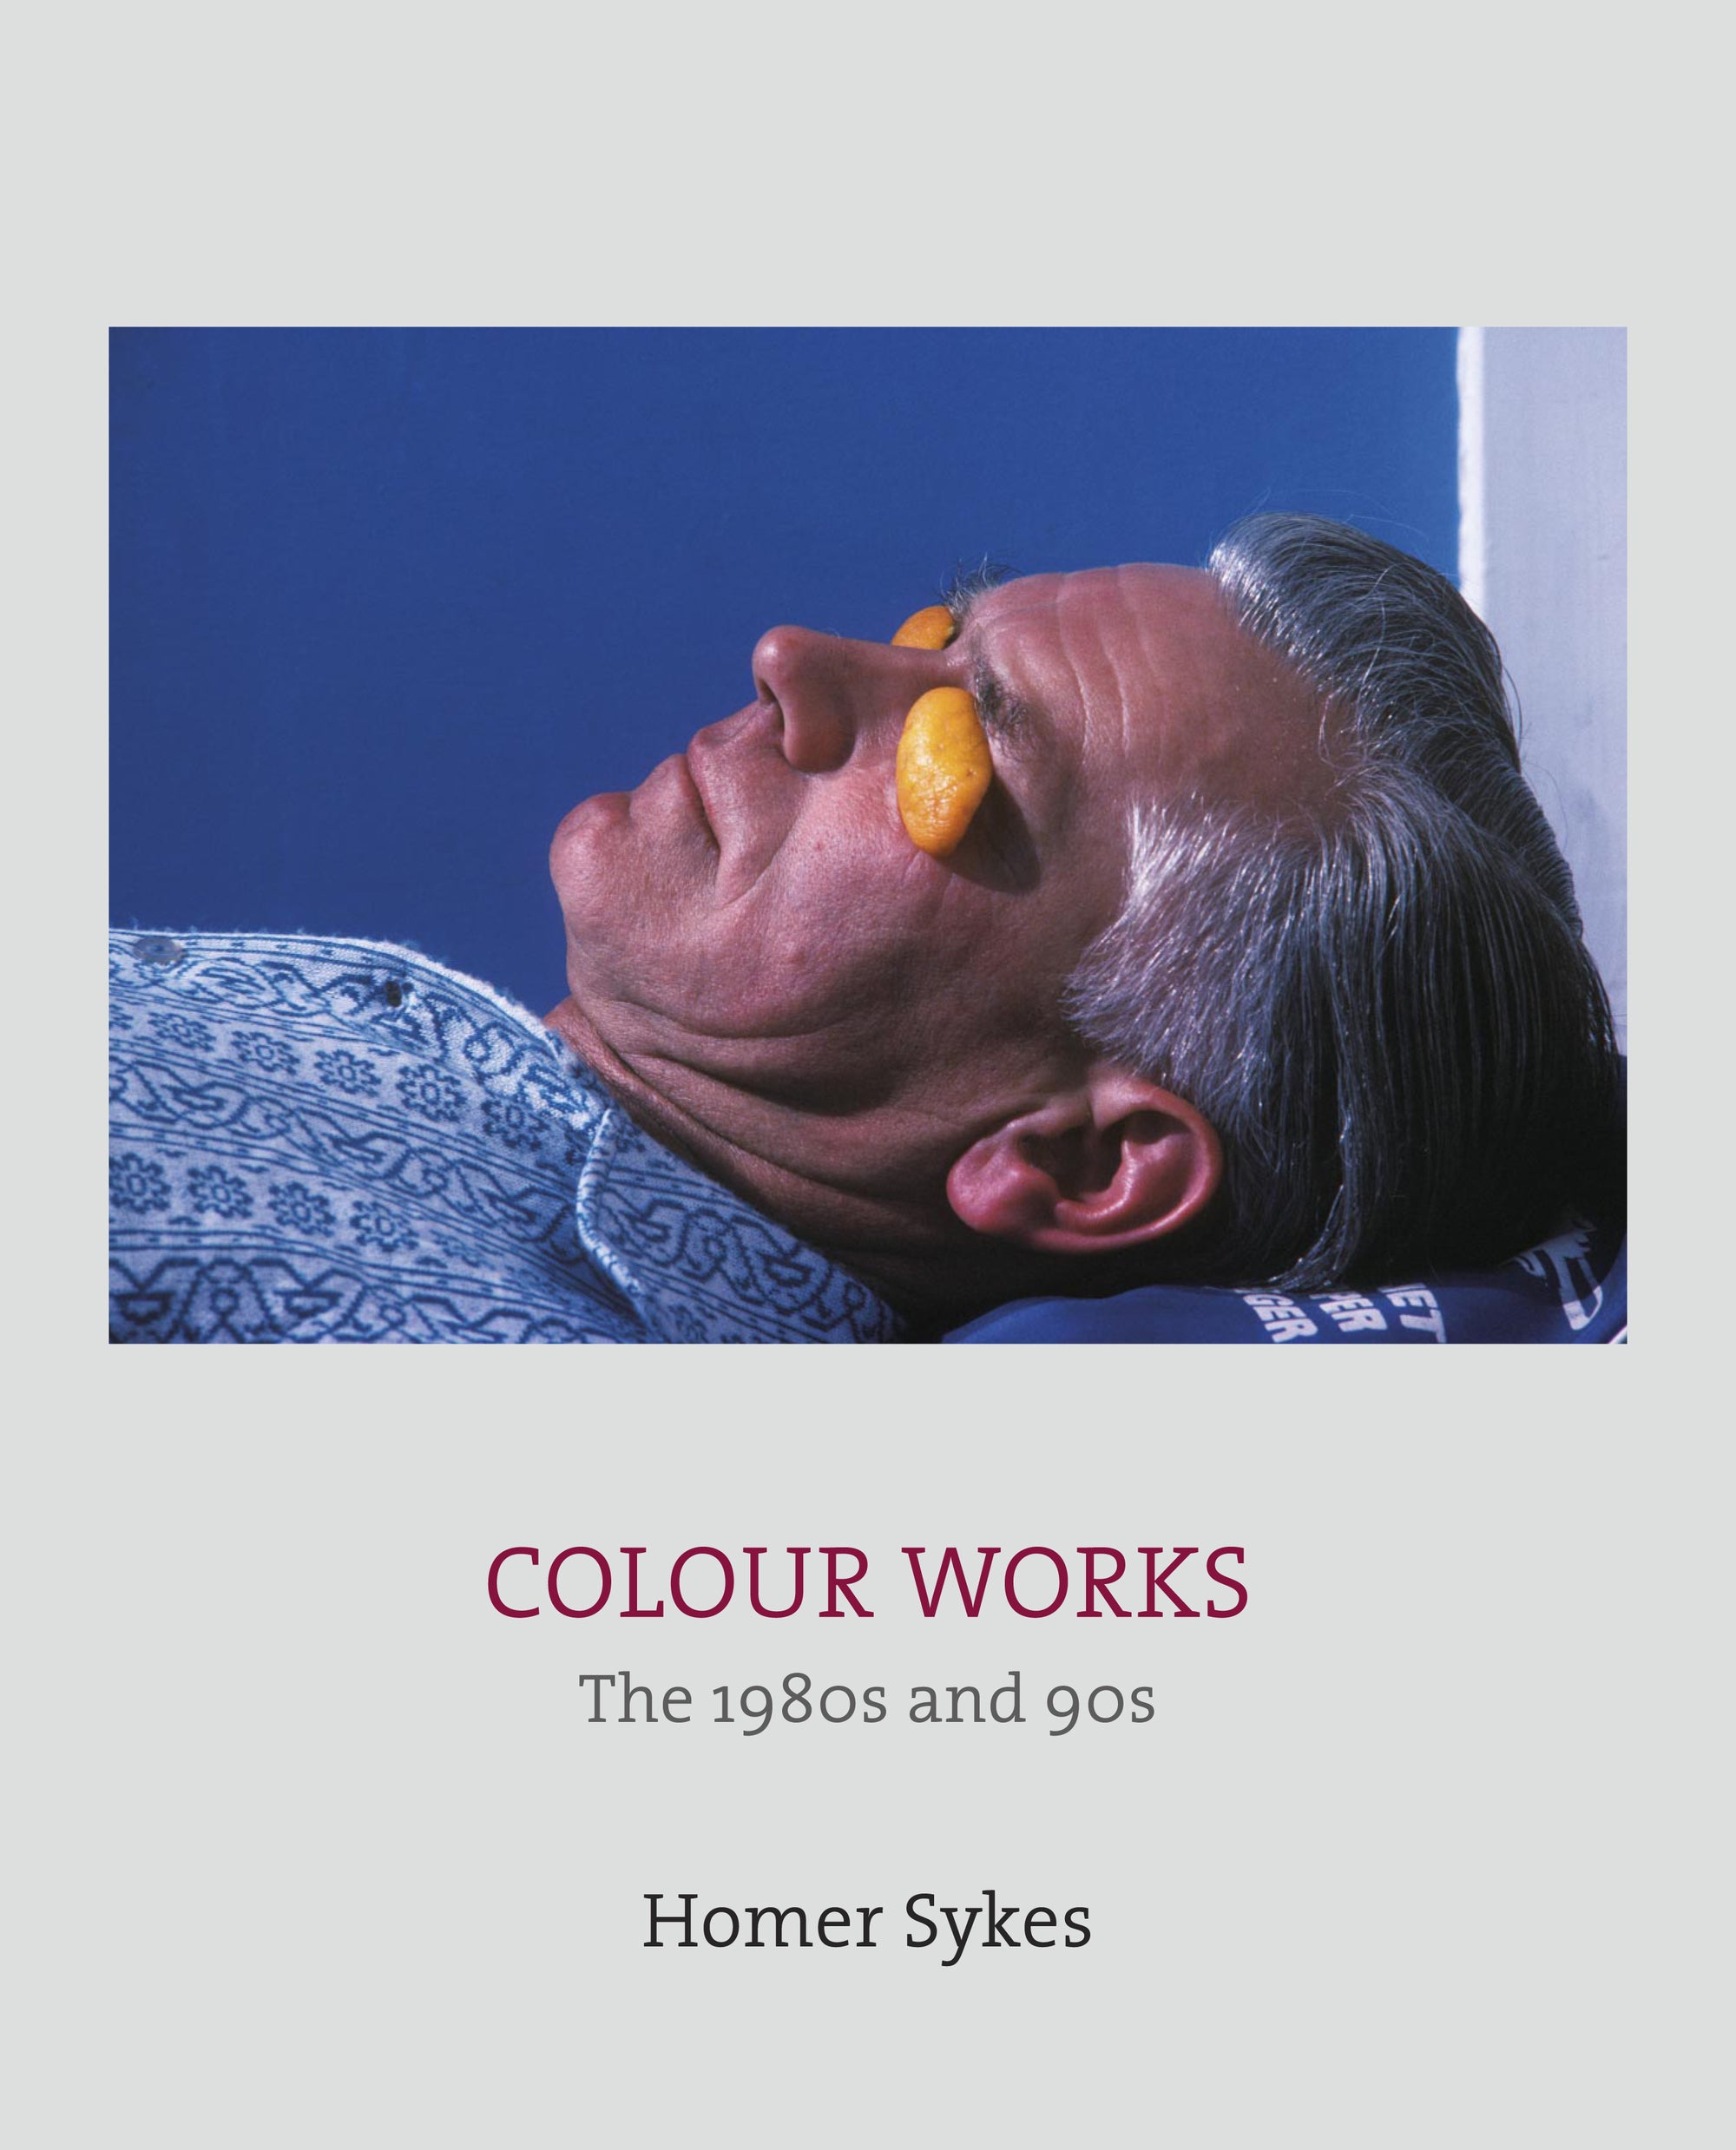 COLOUR WORKS: THE 1980S AND 1990S